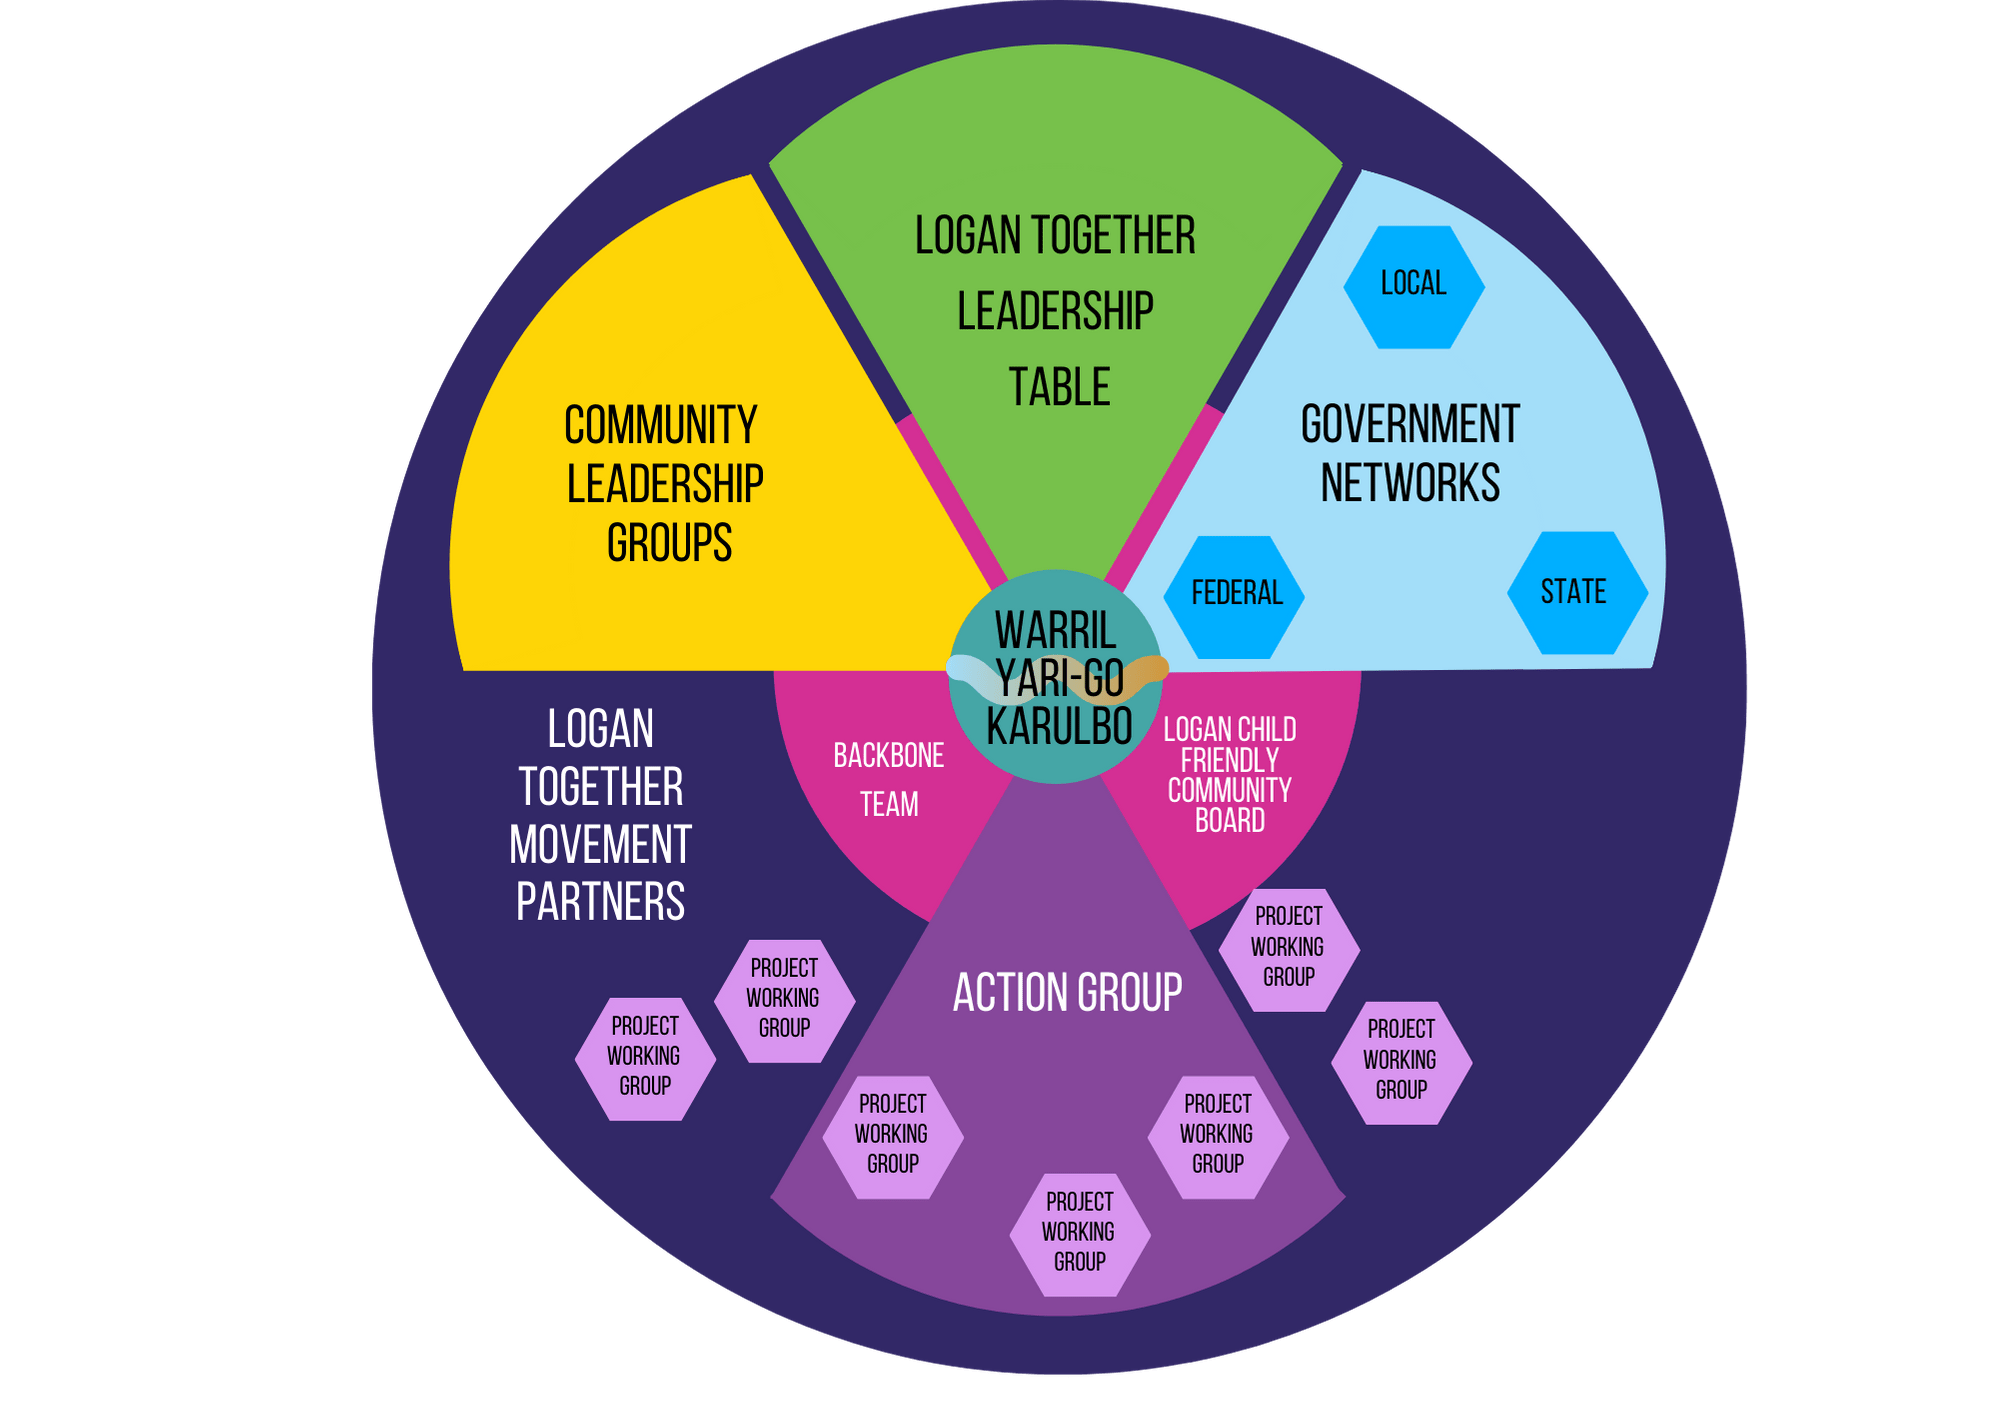 Diagram showing the different groups of people who are involved in Logan Together: community leadership groups, Logan Together leadership table, Government networks (local, state and federal), the action group, partners, the backbone team, the logan friendly childhood board, and the first nations people-led warril yari-go karulbo, which sits in the centre of the diagram.